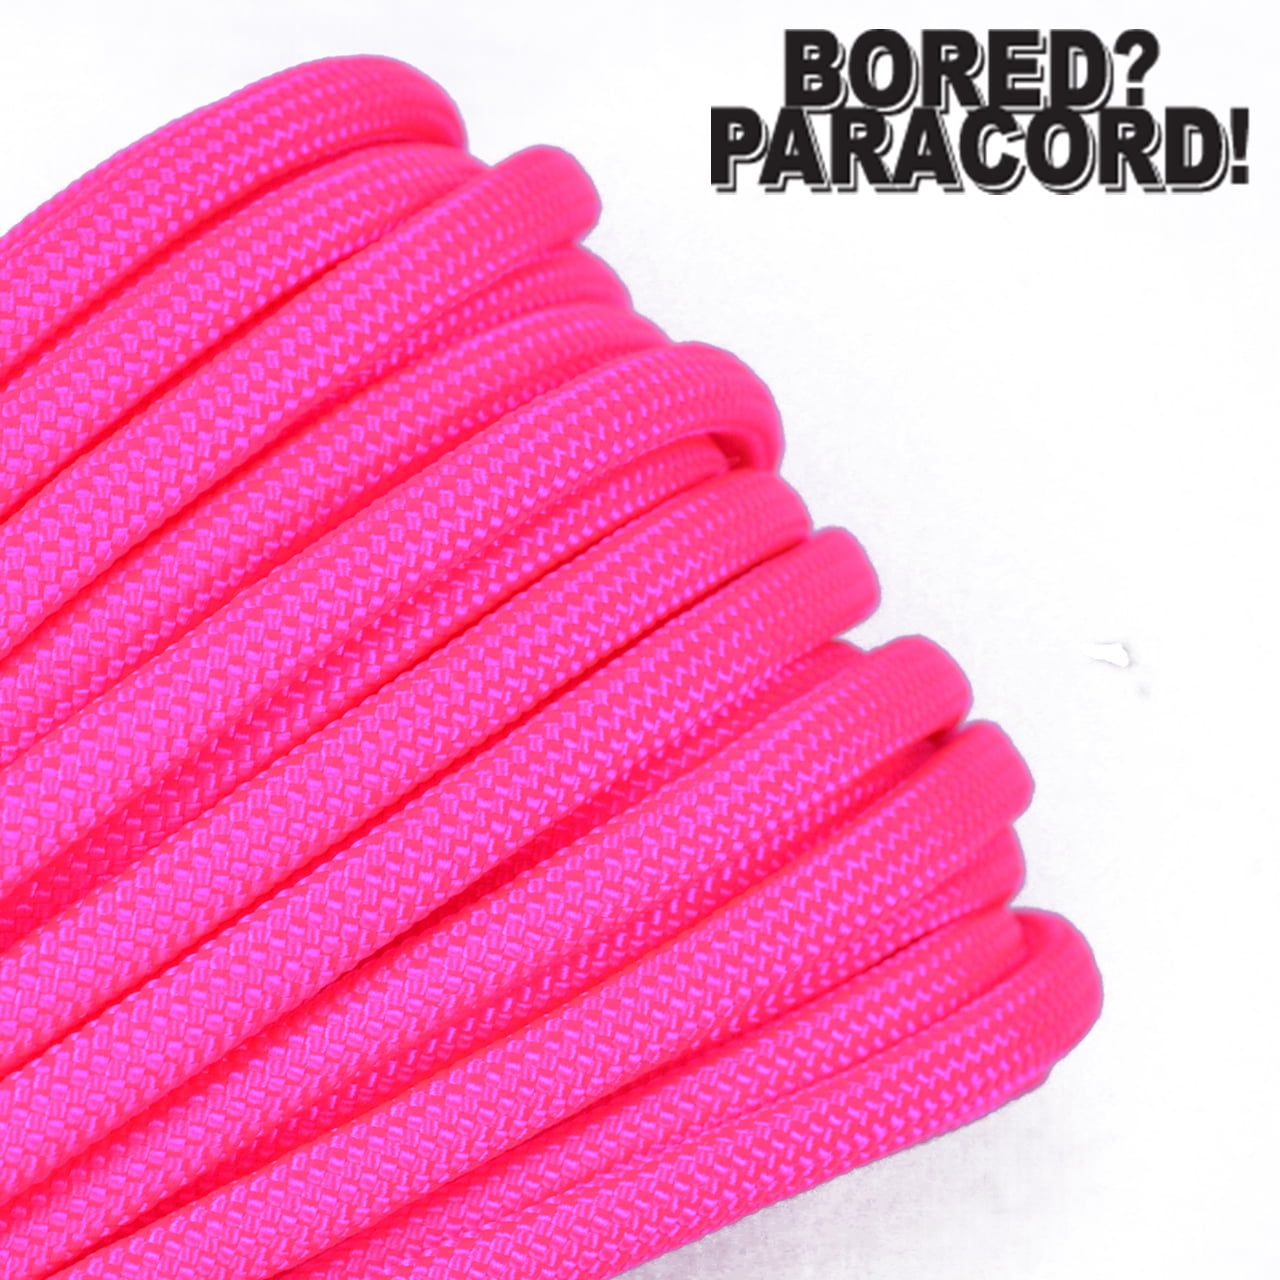 100 Feet 25 Neon Pink Diamonds 100 Hanks of Parachute 550 Cord Type III 7 Strand Paracord 50 10 Bored Paracord